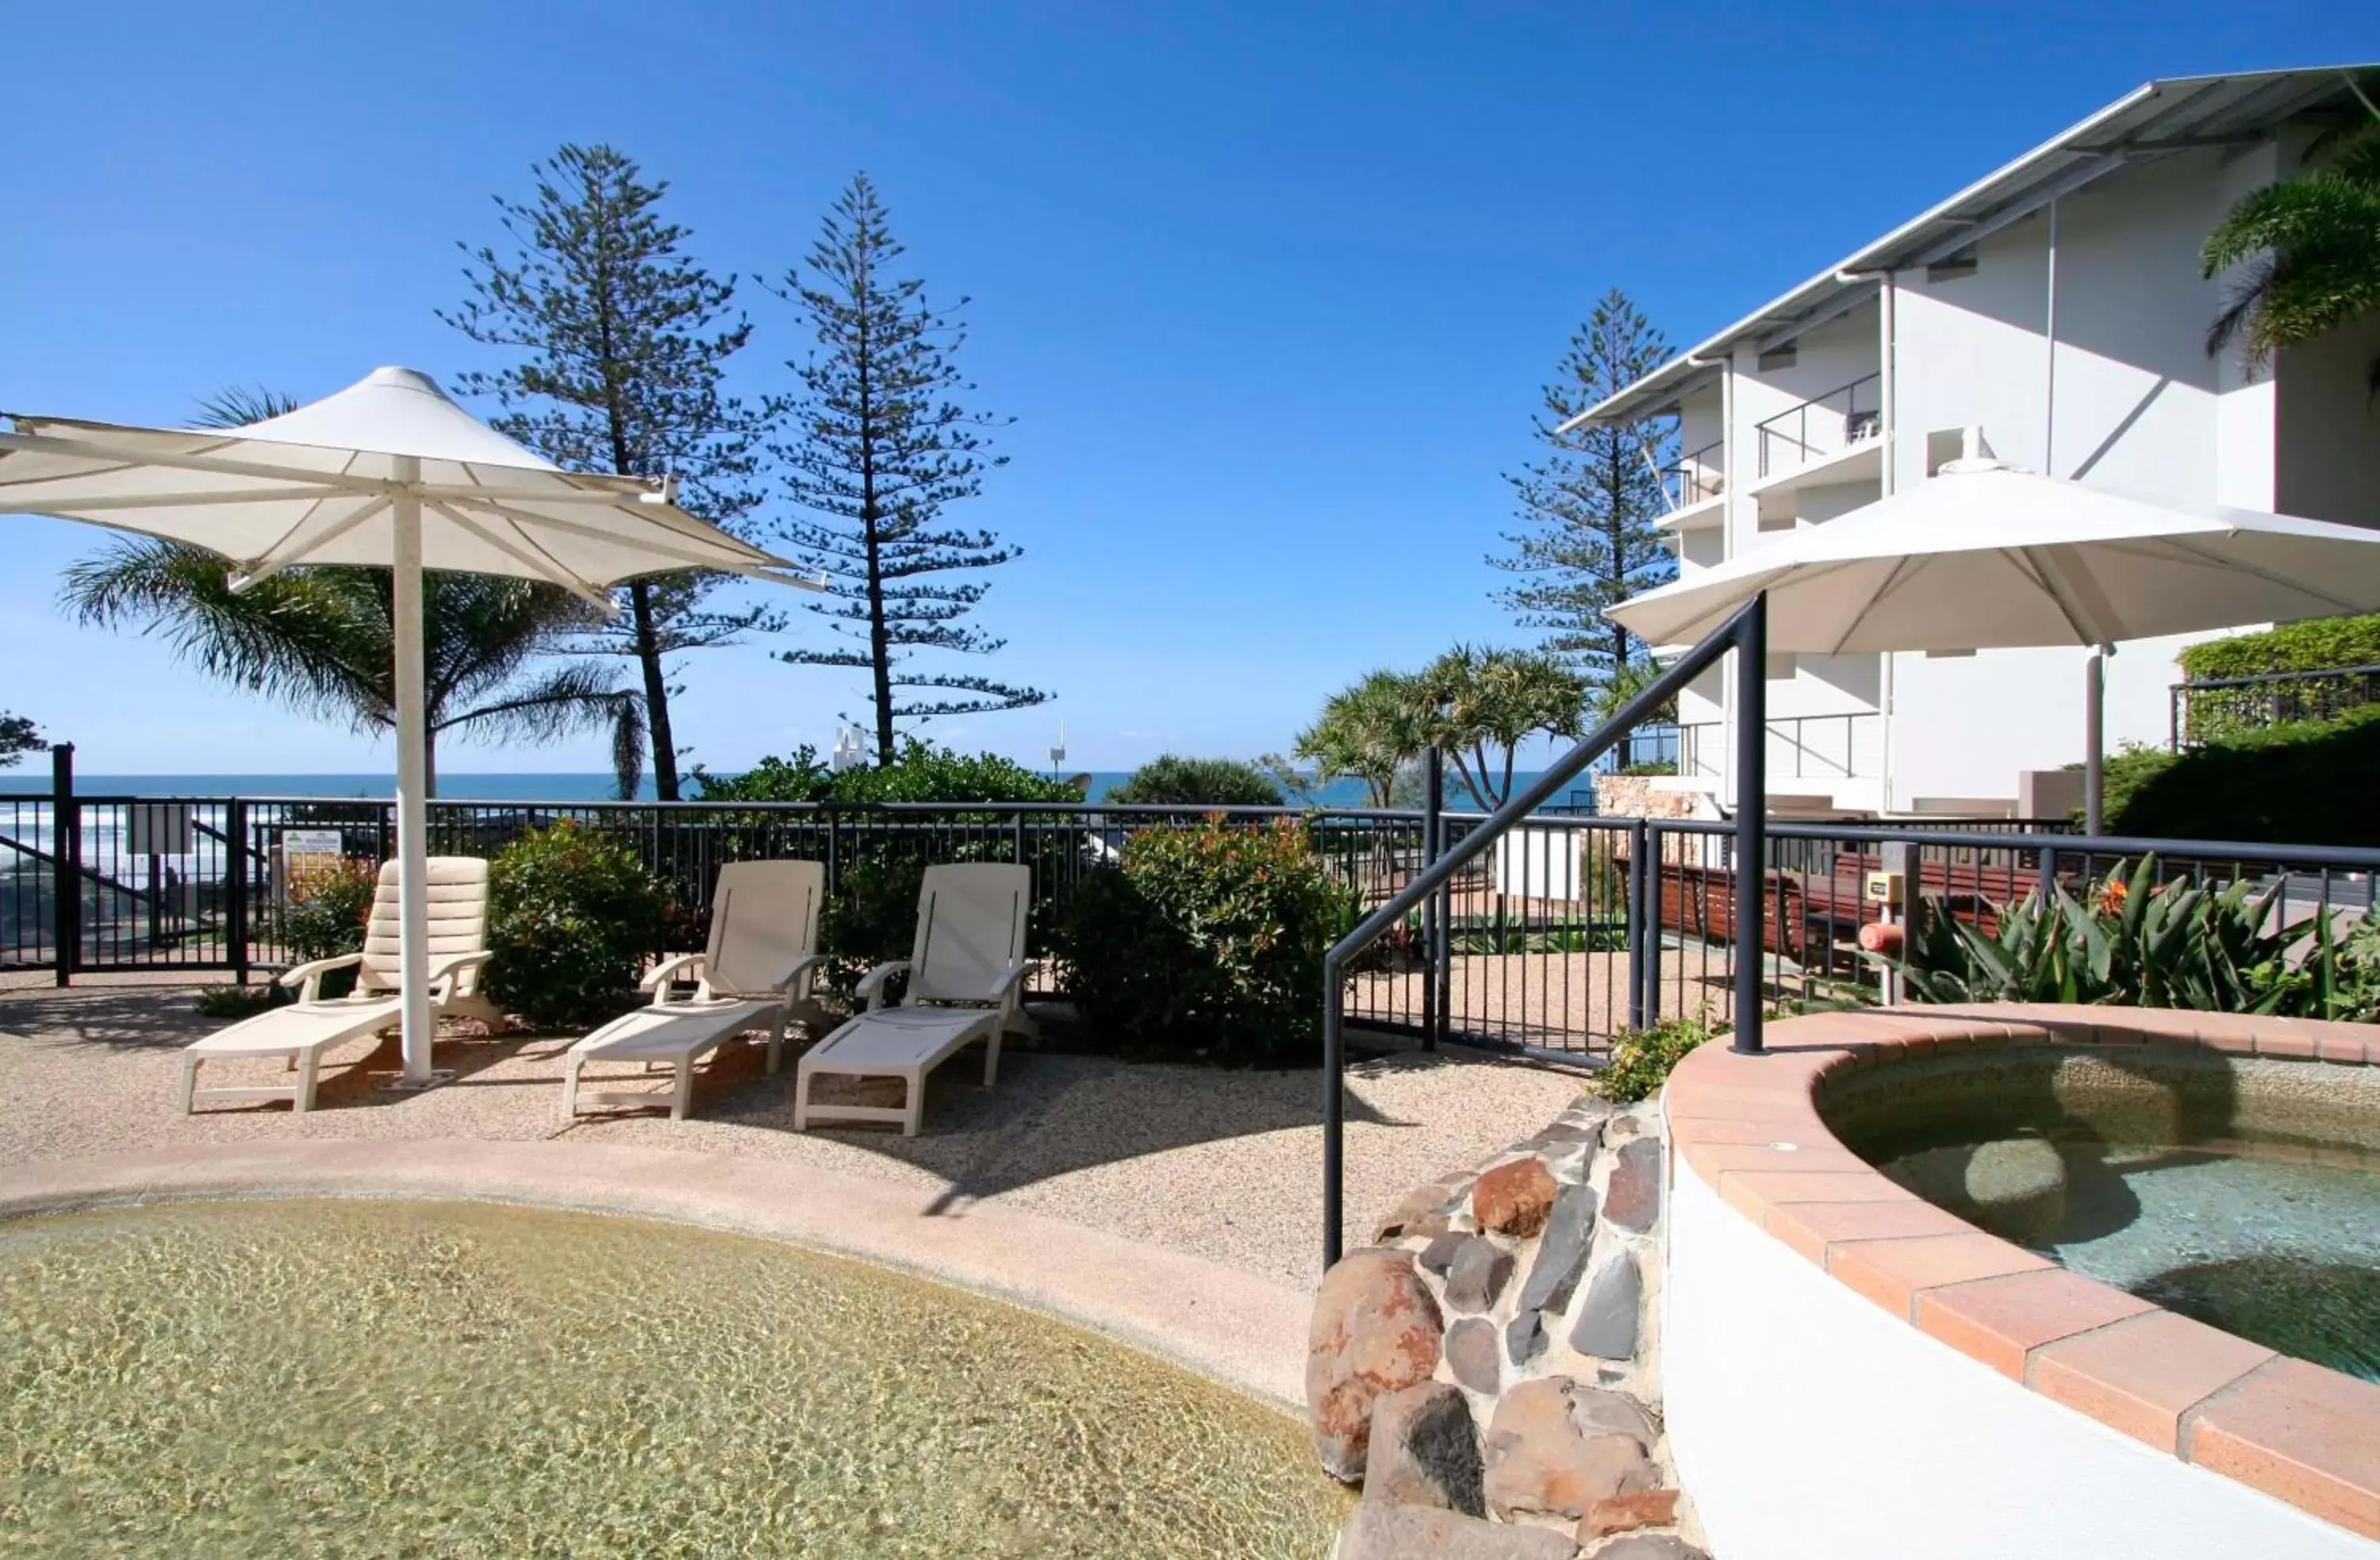 Property building in The Beach Retreat Coolum